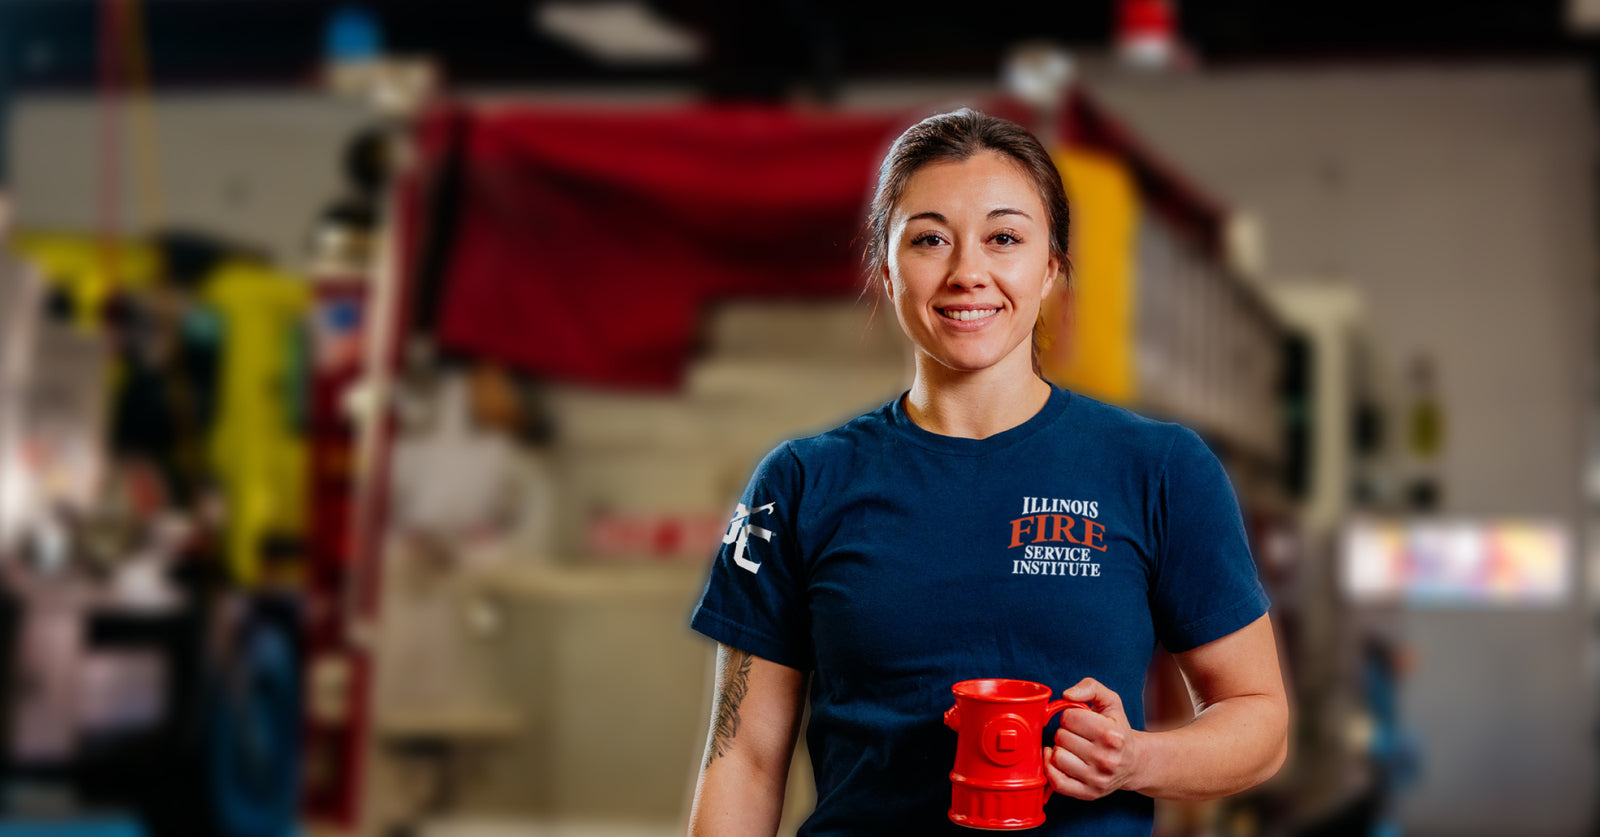 Female firefighter smiling and holding a cup of coffee in a red fire hydrant shaped mug.